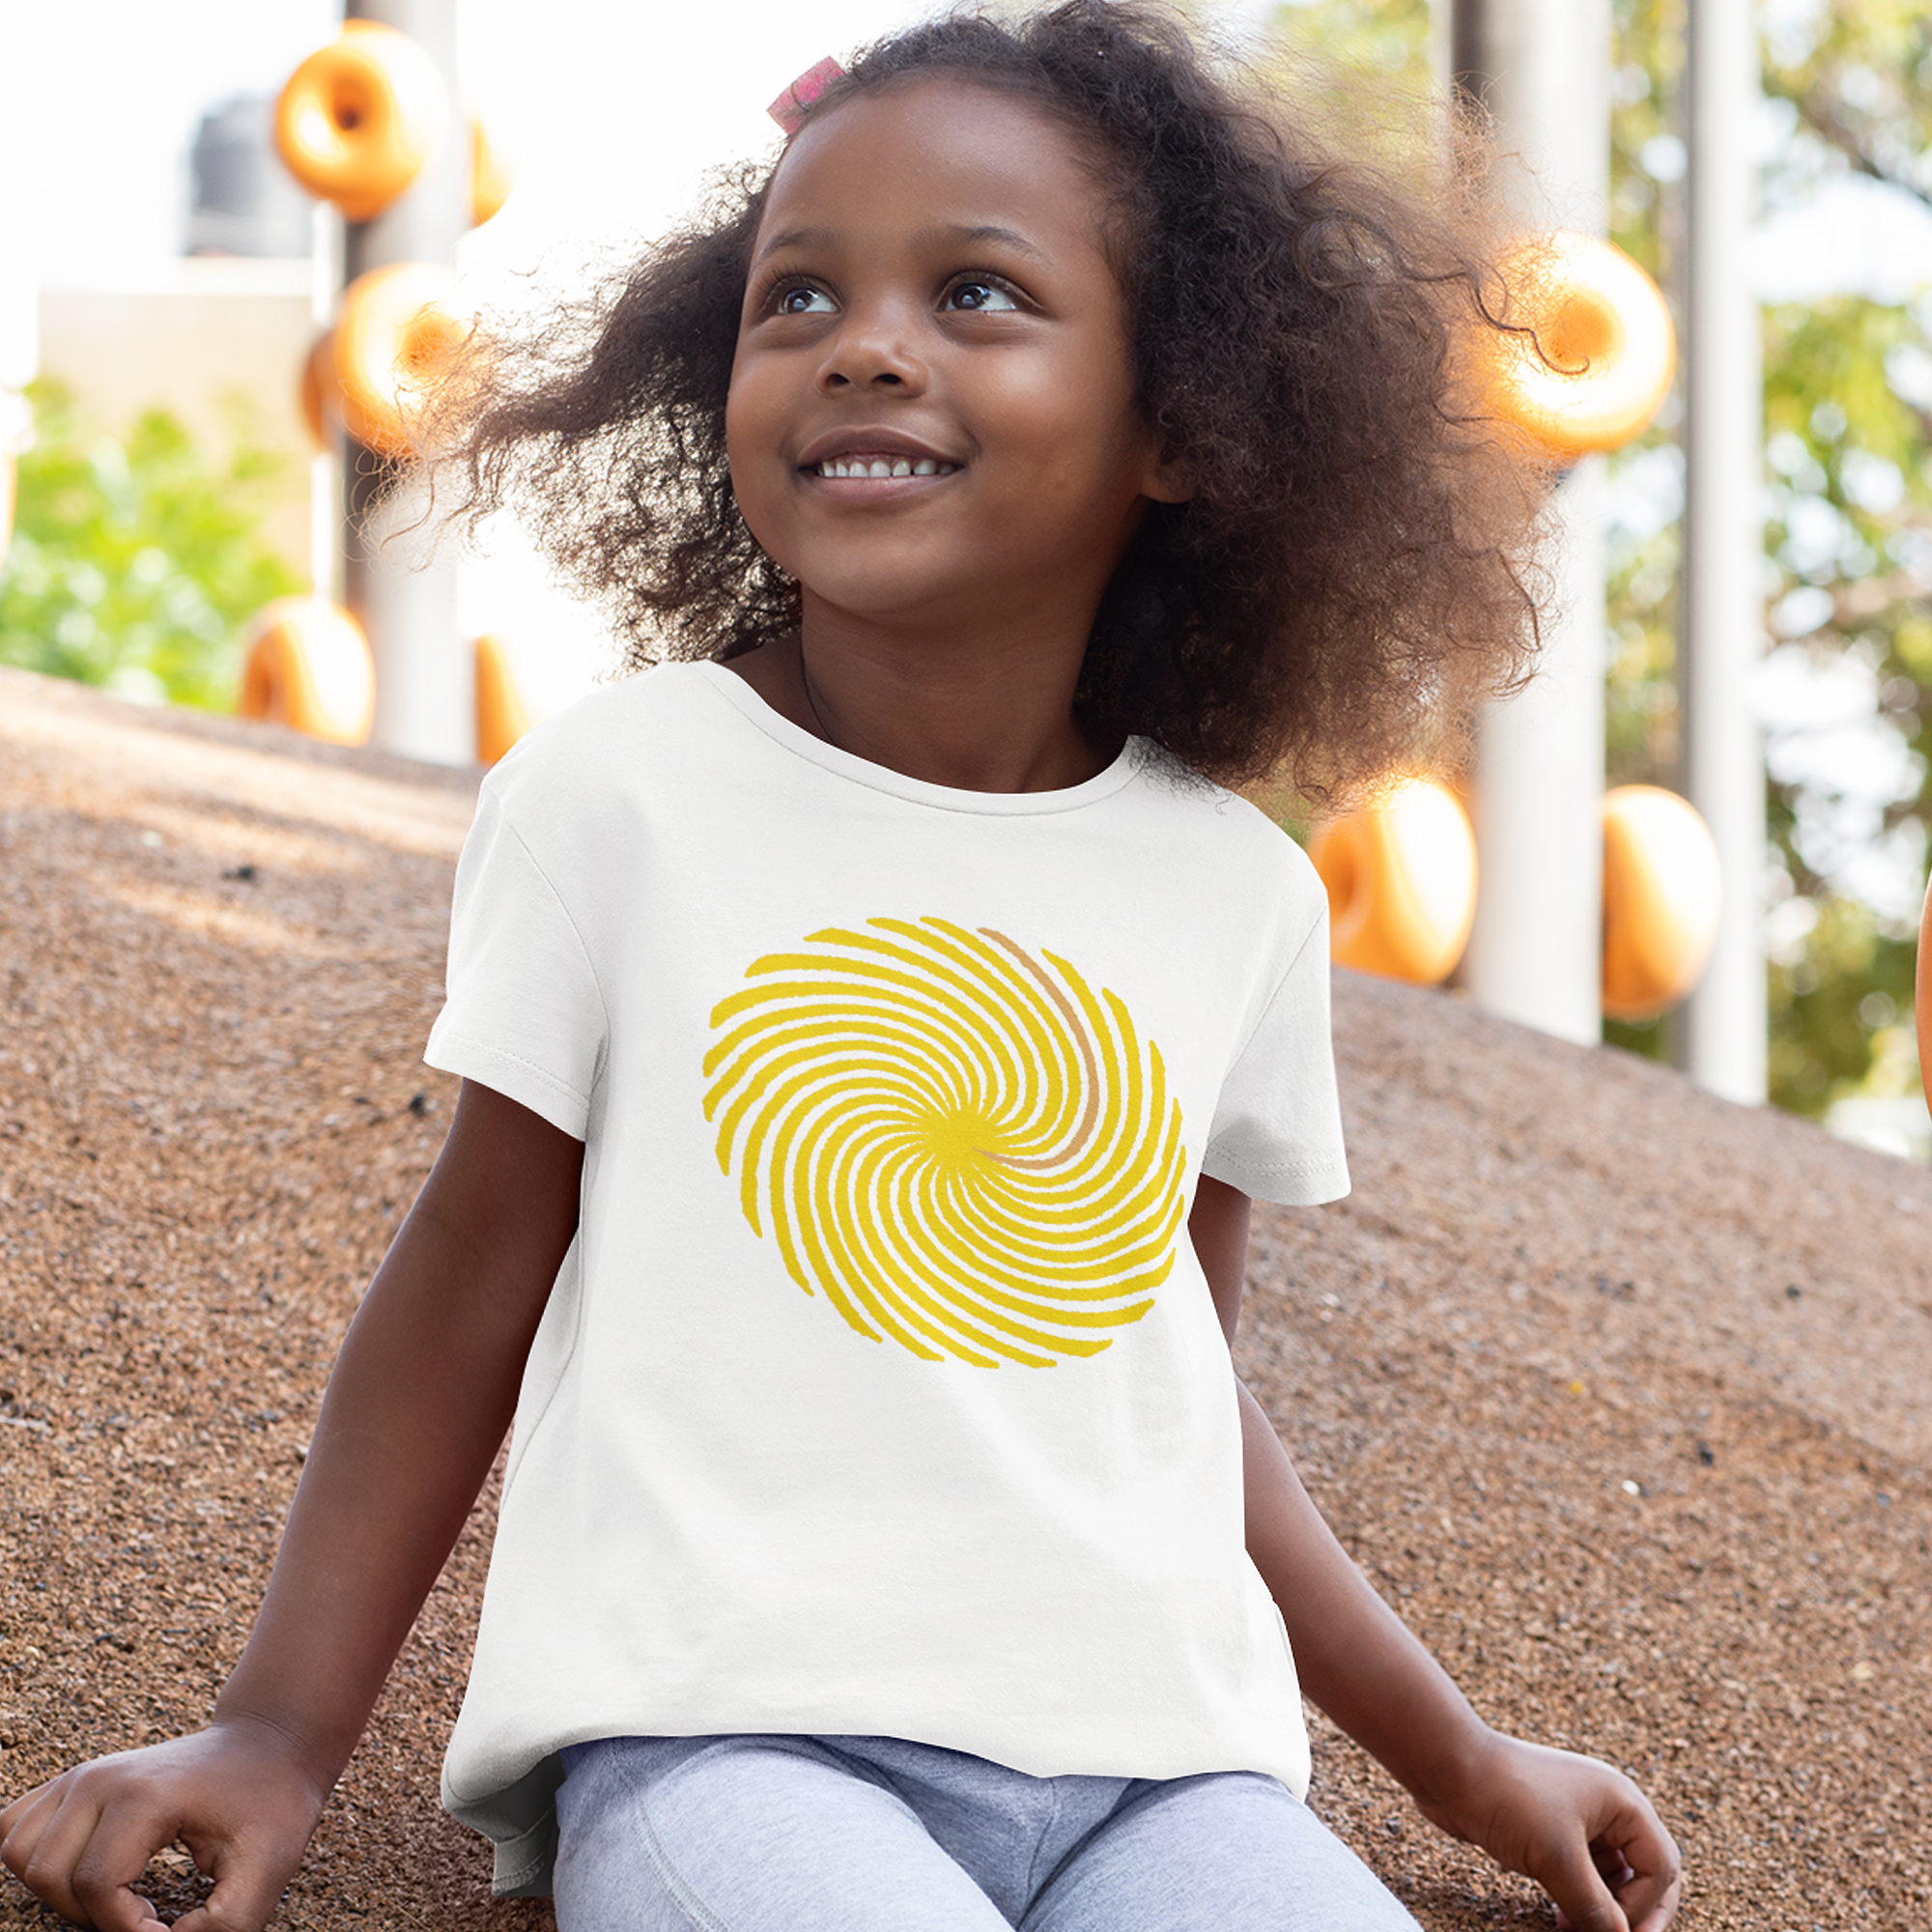 The coolest unisex urban fashion for kids.